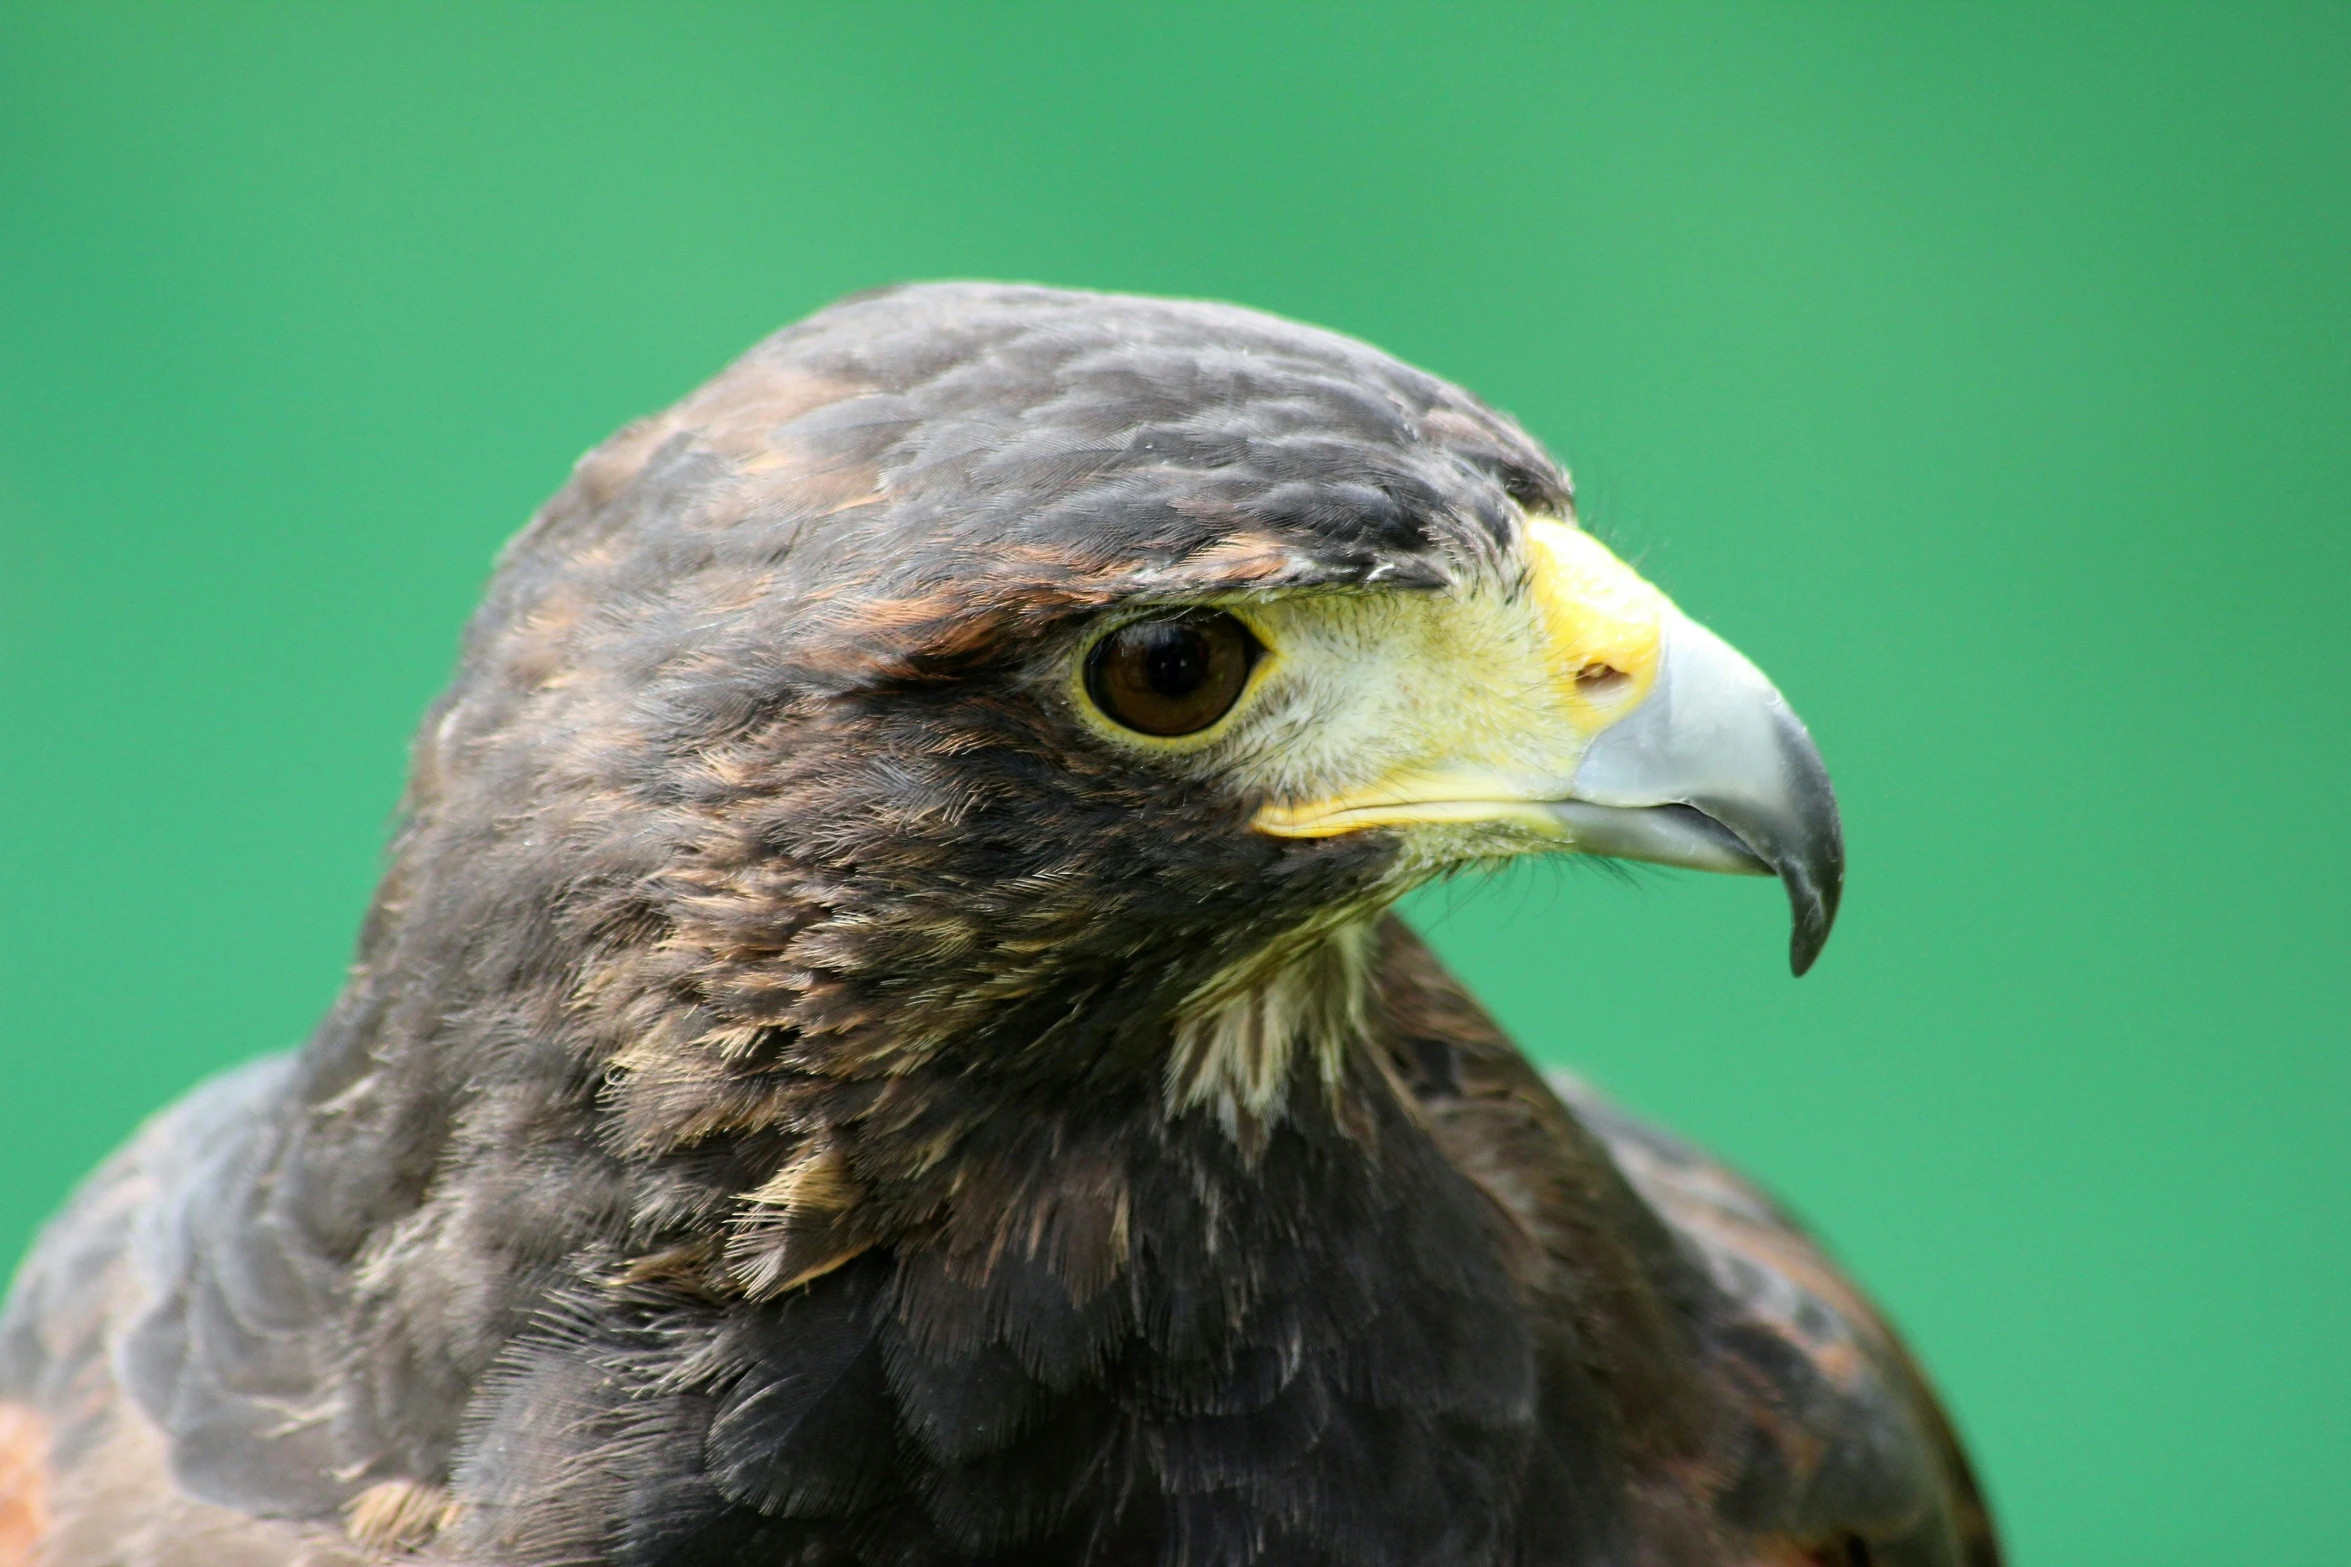 the hawk has large, yellow beaks and black feathers